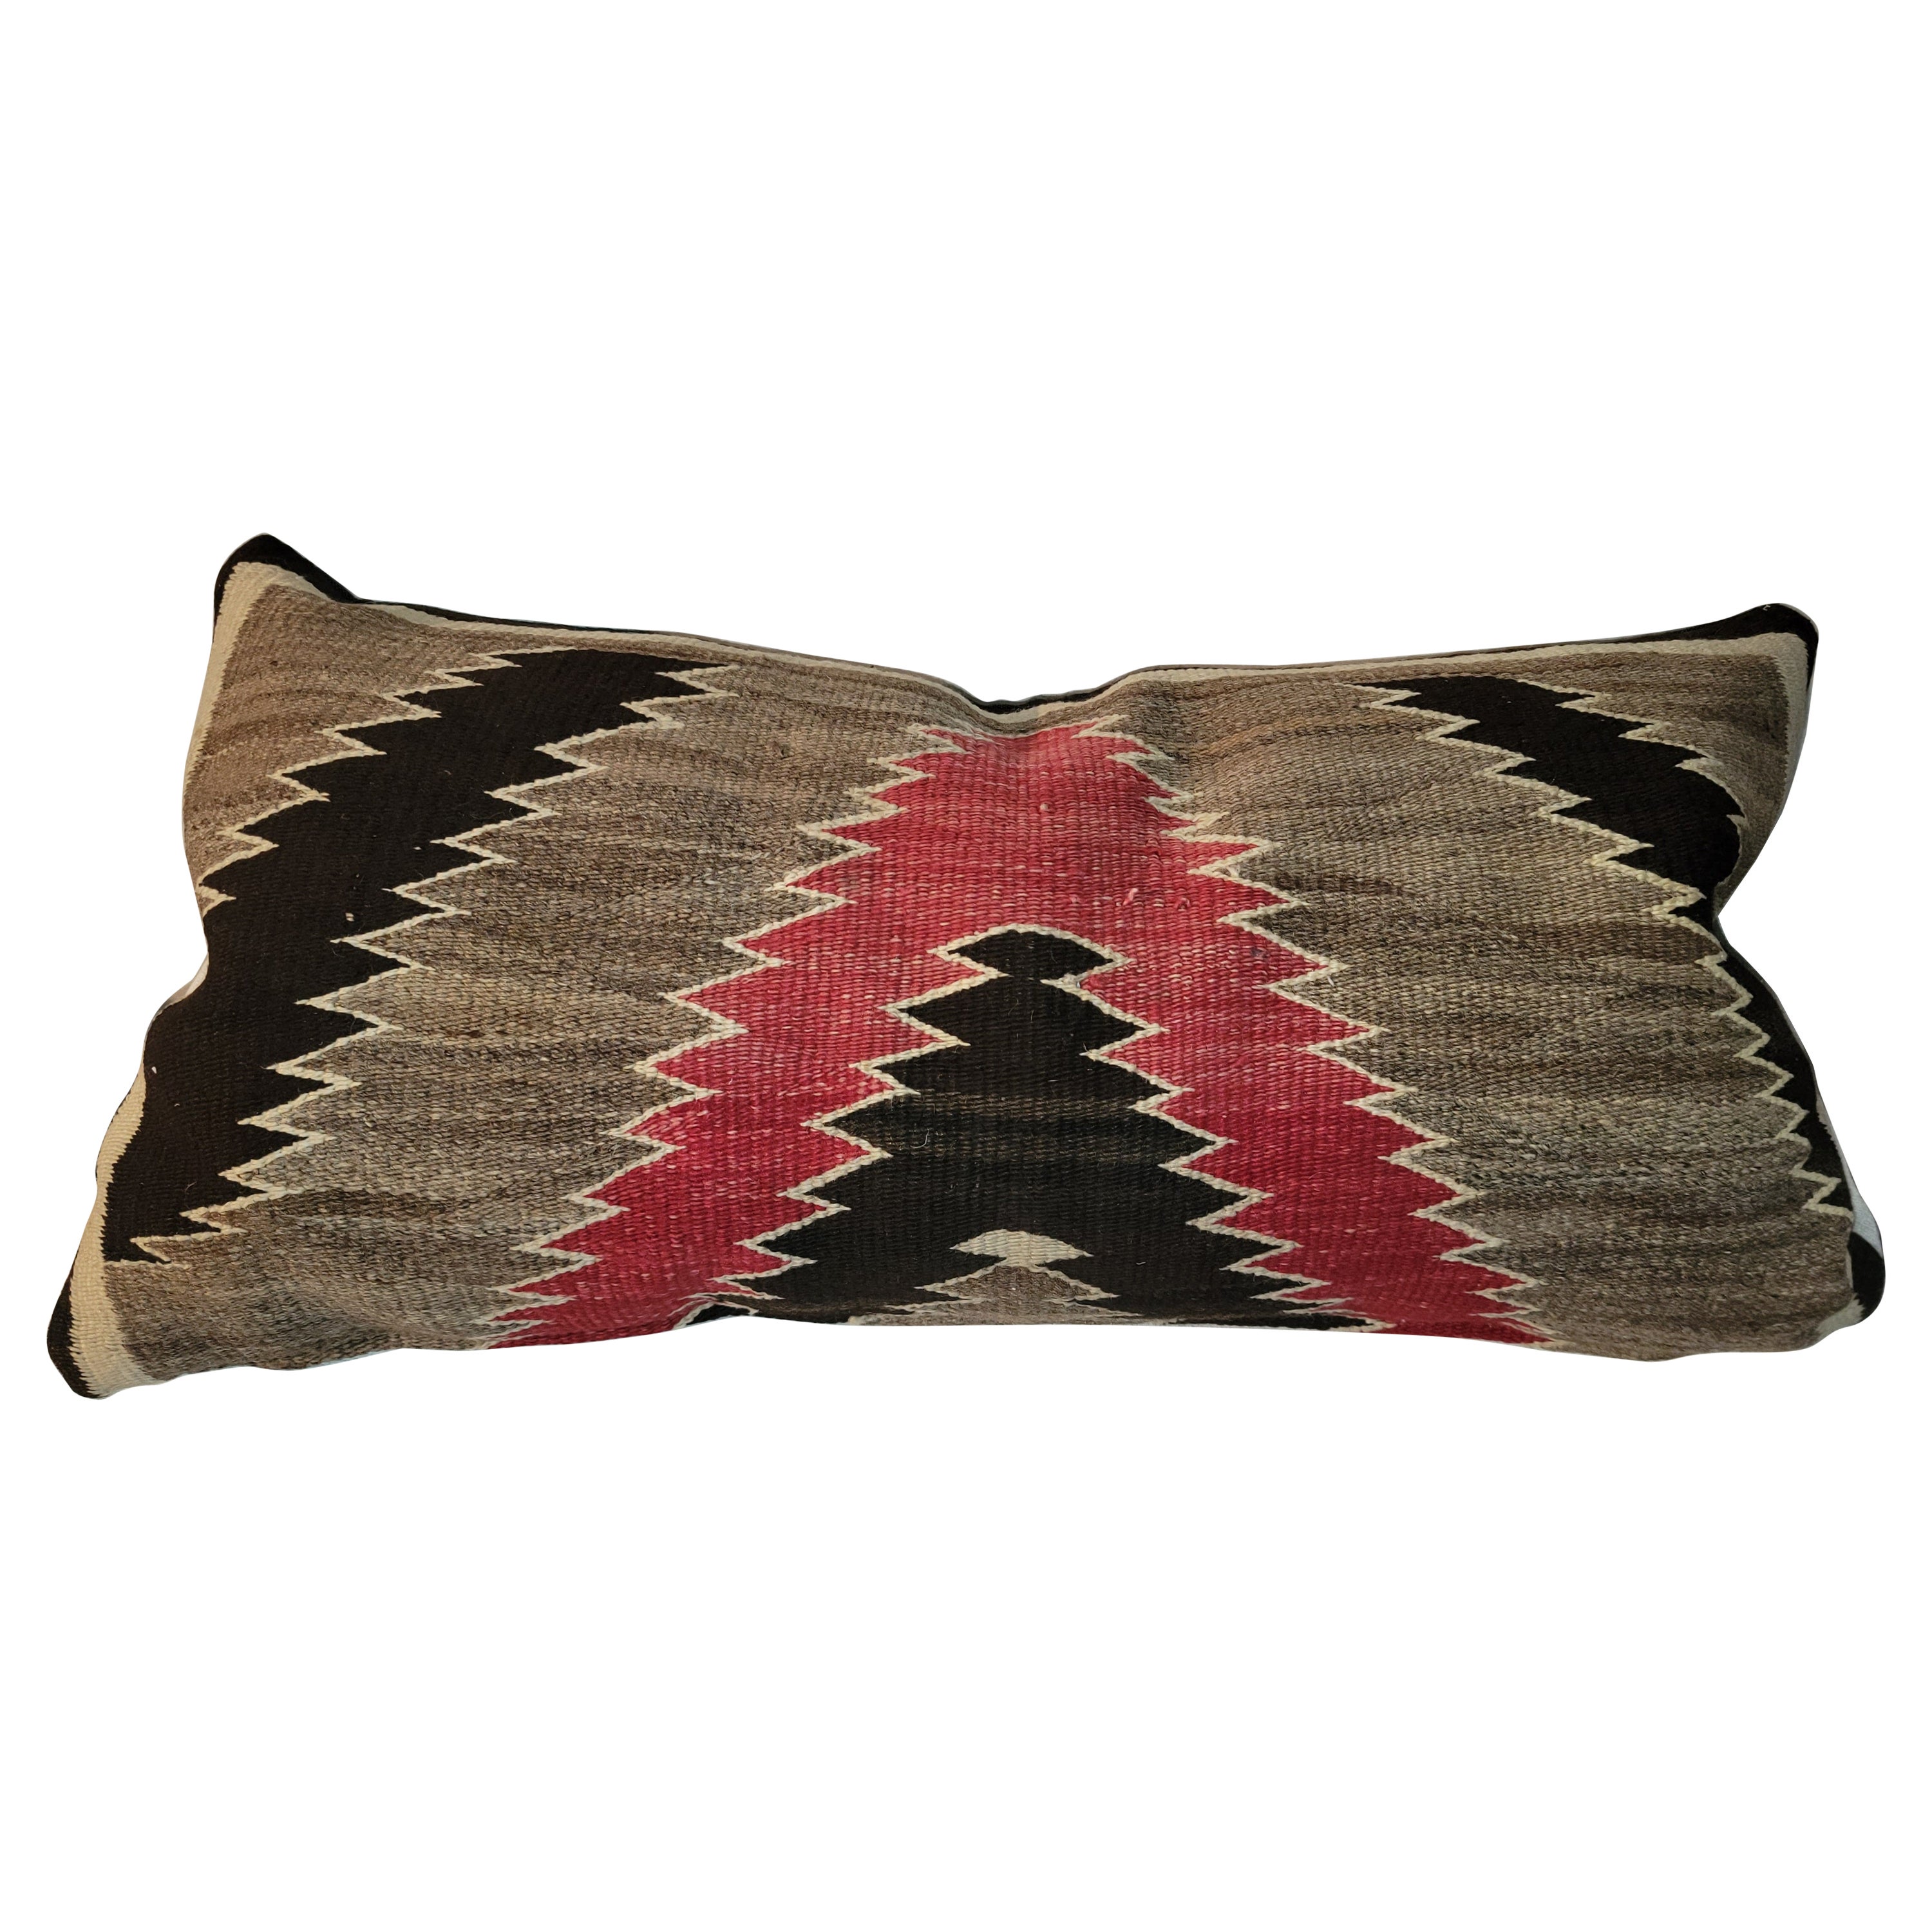 Large Navajo Indian Weaving Bolster Pillow For Sale